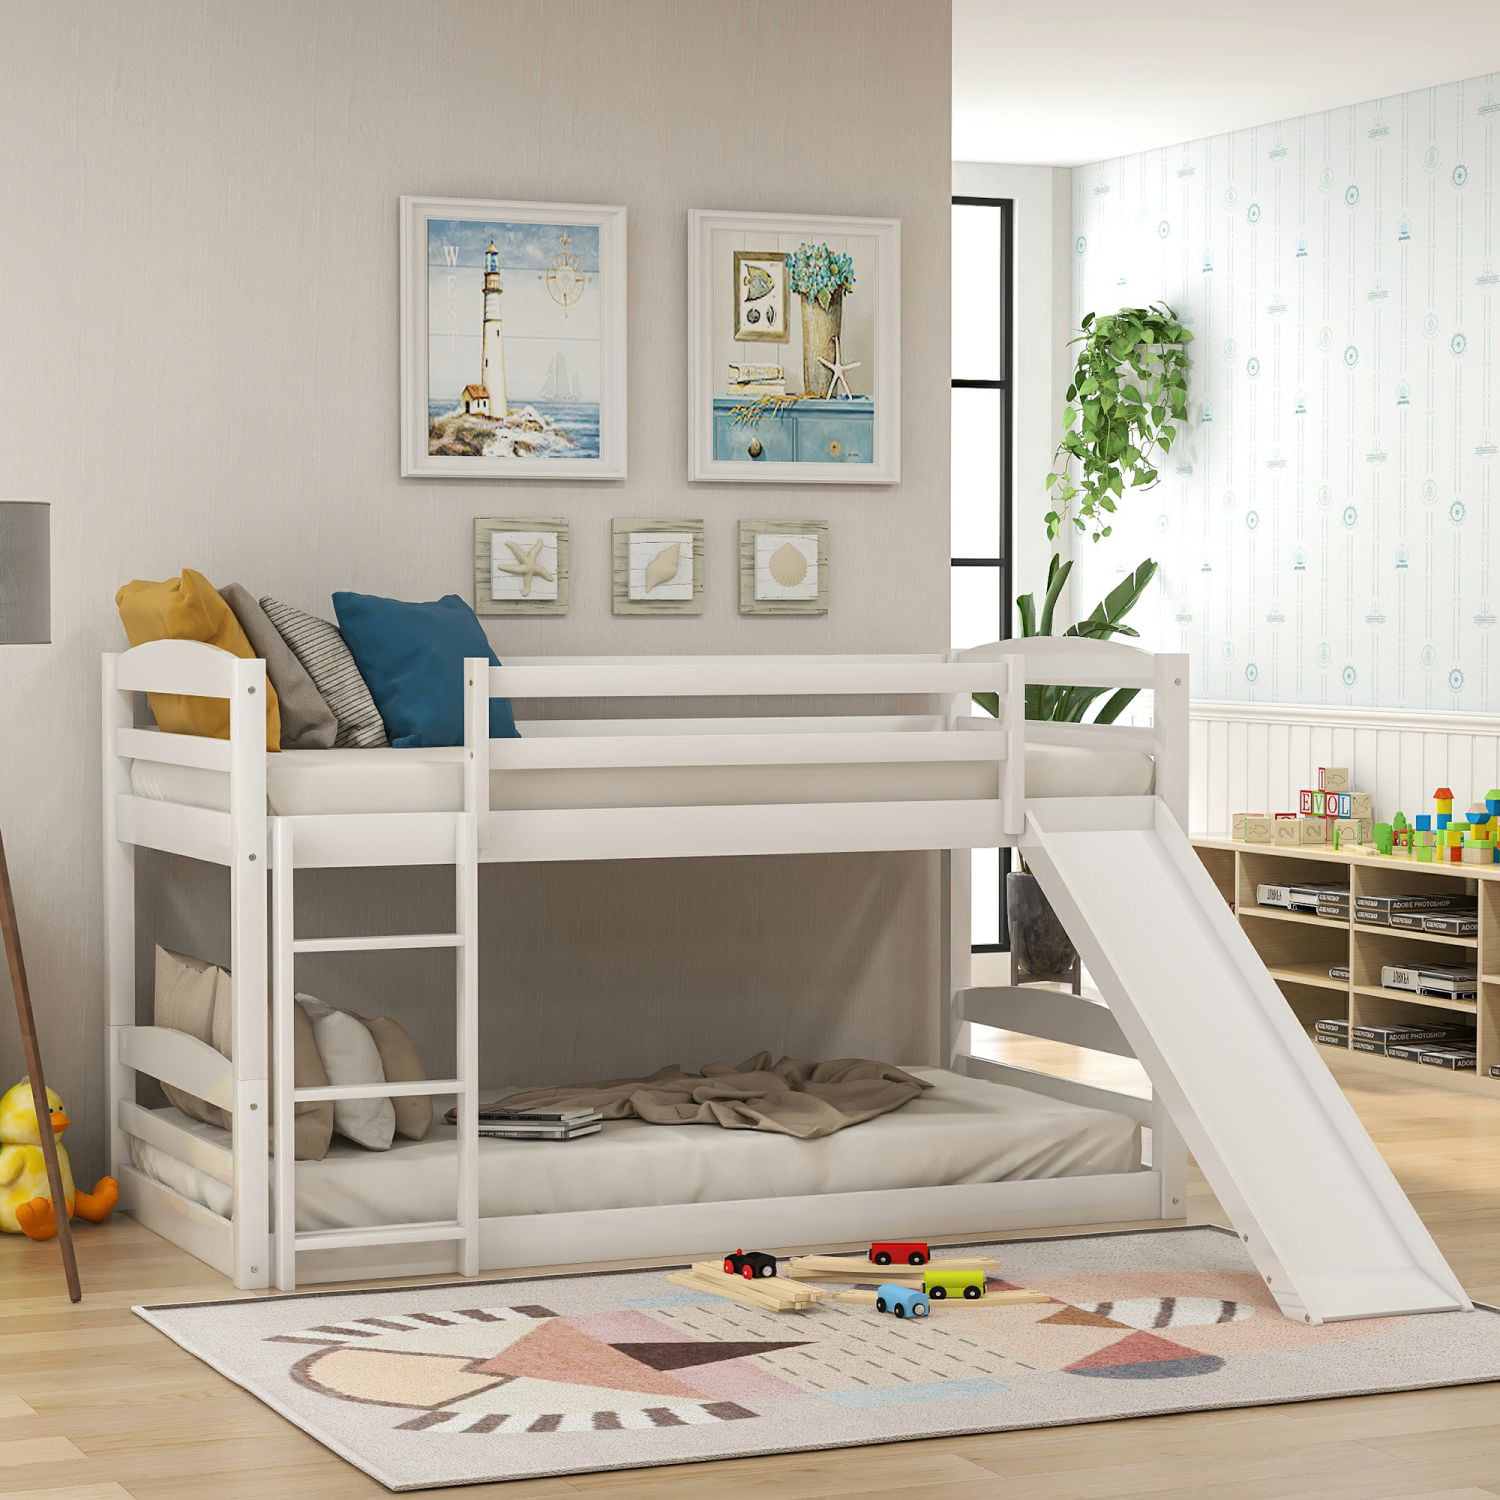 Modern Low Bunk Bed Solid Wood Twin, Boy And Girl Bunk Bed Ideas